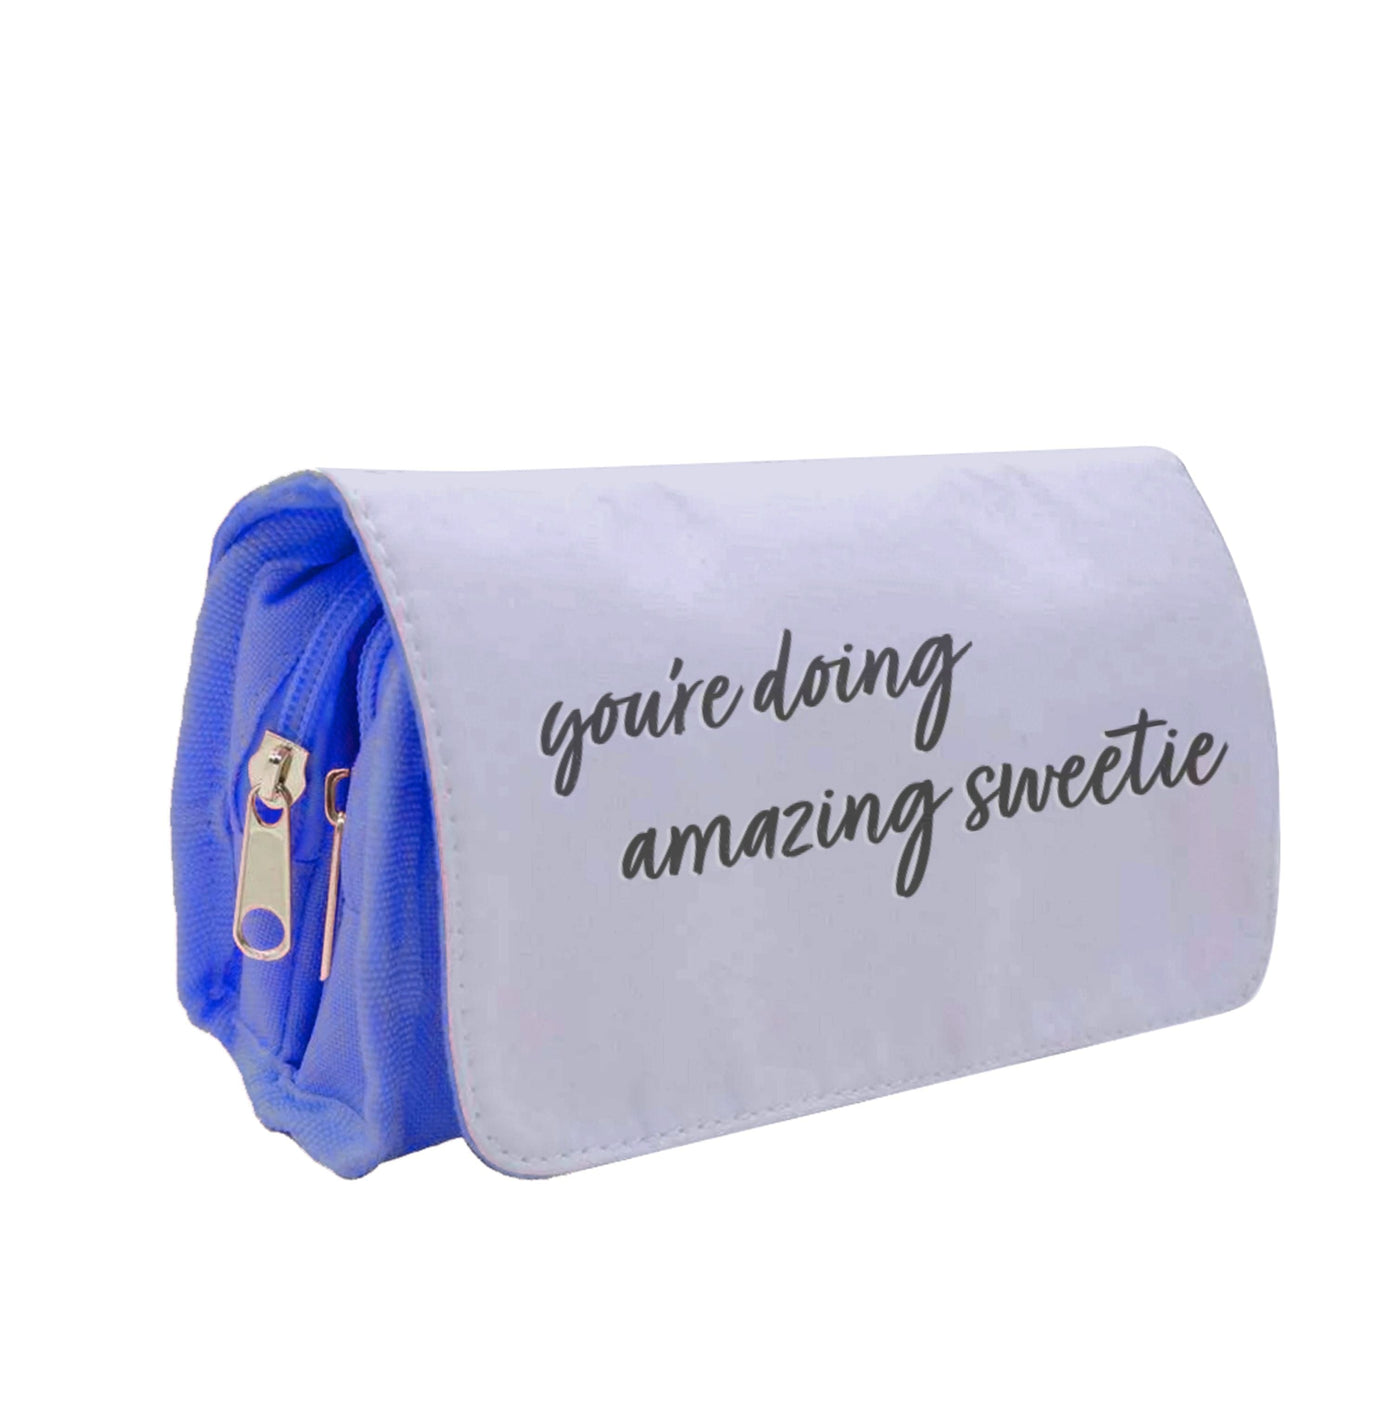 You're Doing Amazing Sweetie - Kris Jenner Pencil Case